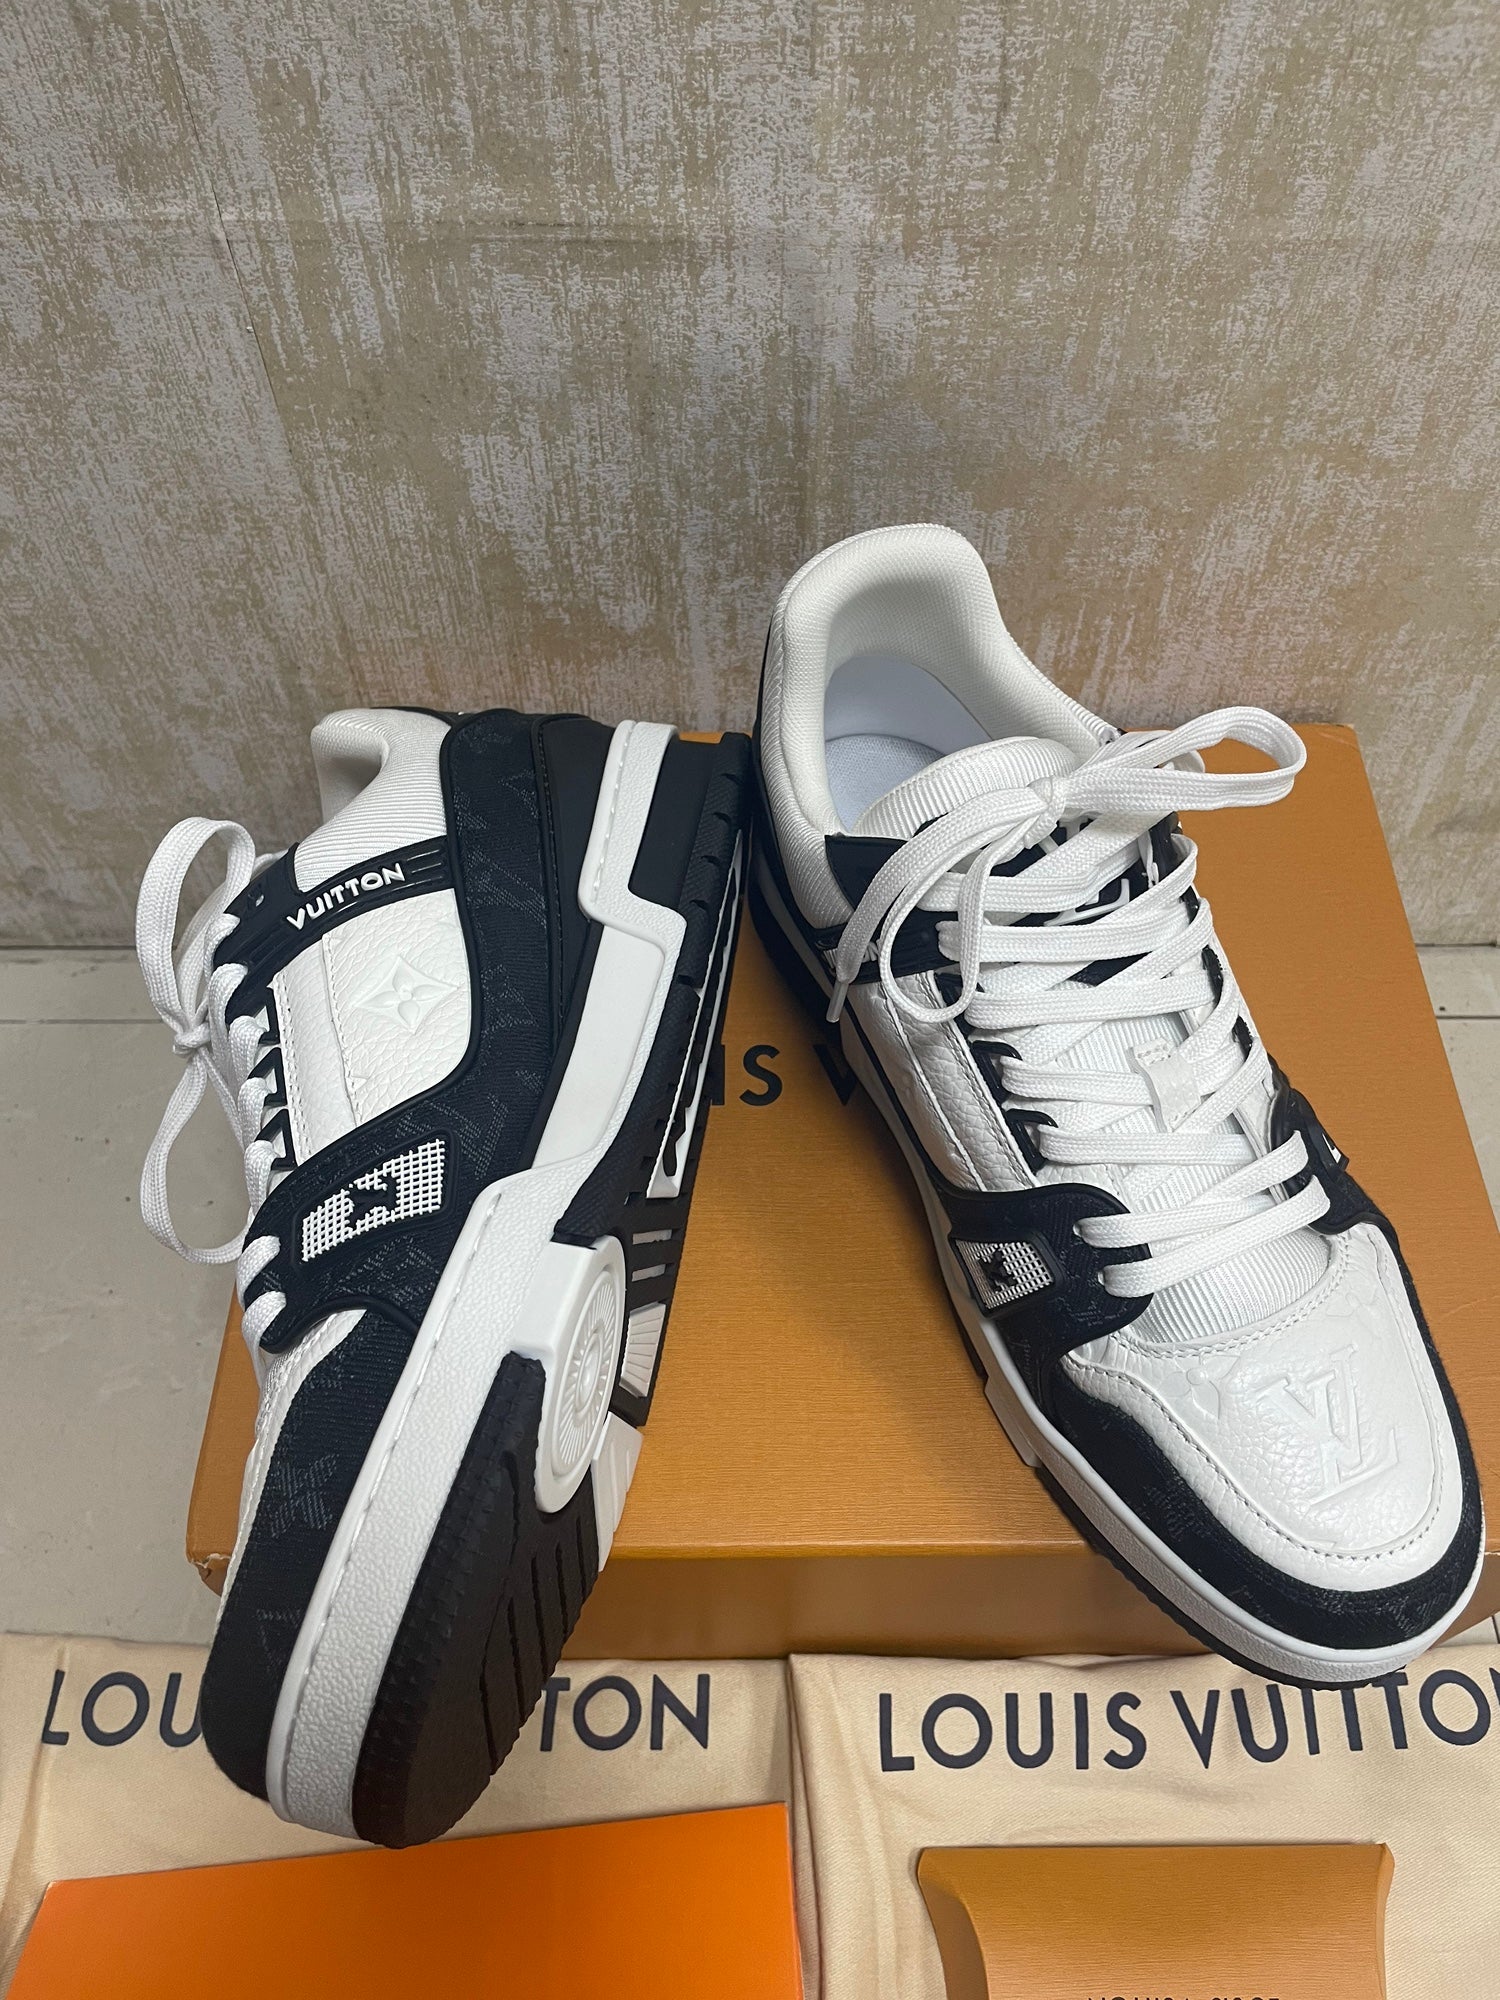 Louis Vuitton LV 408 Trainer in Black and White